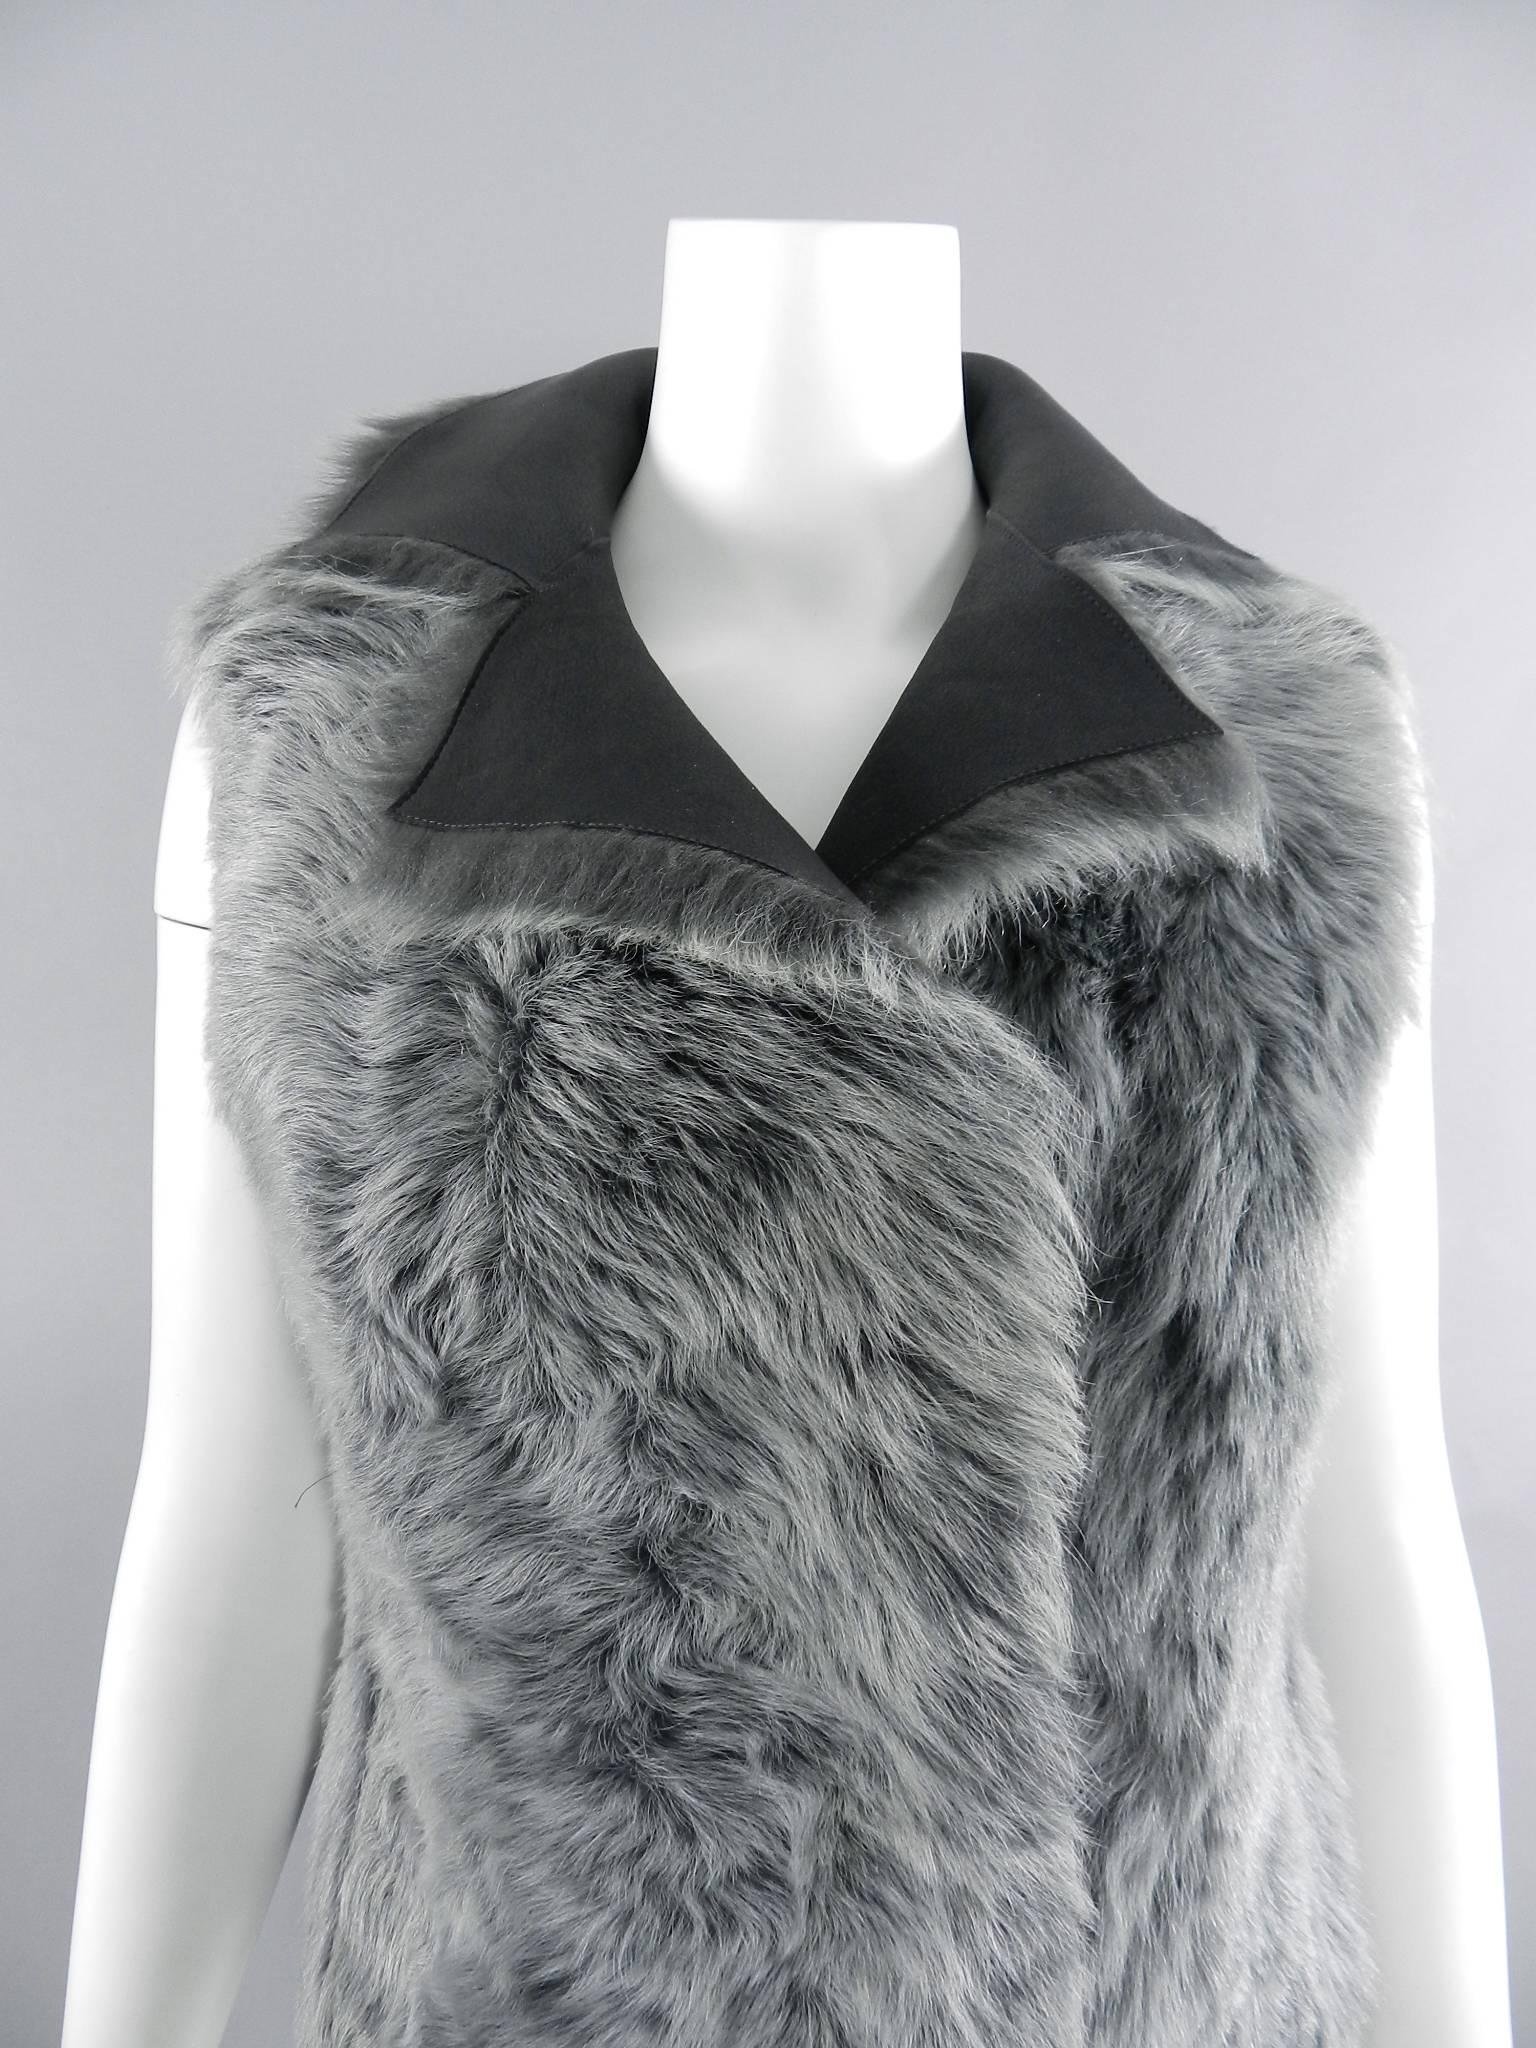 Akris Punto Grey Reversible Lambskin Shearling Fur Vest In Excellent Condition For Sale In Toronto, ON